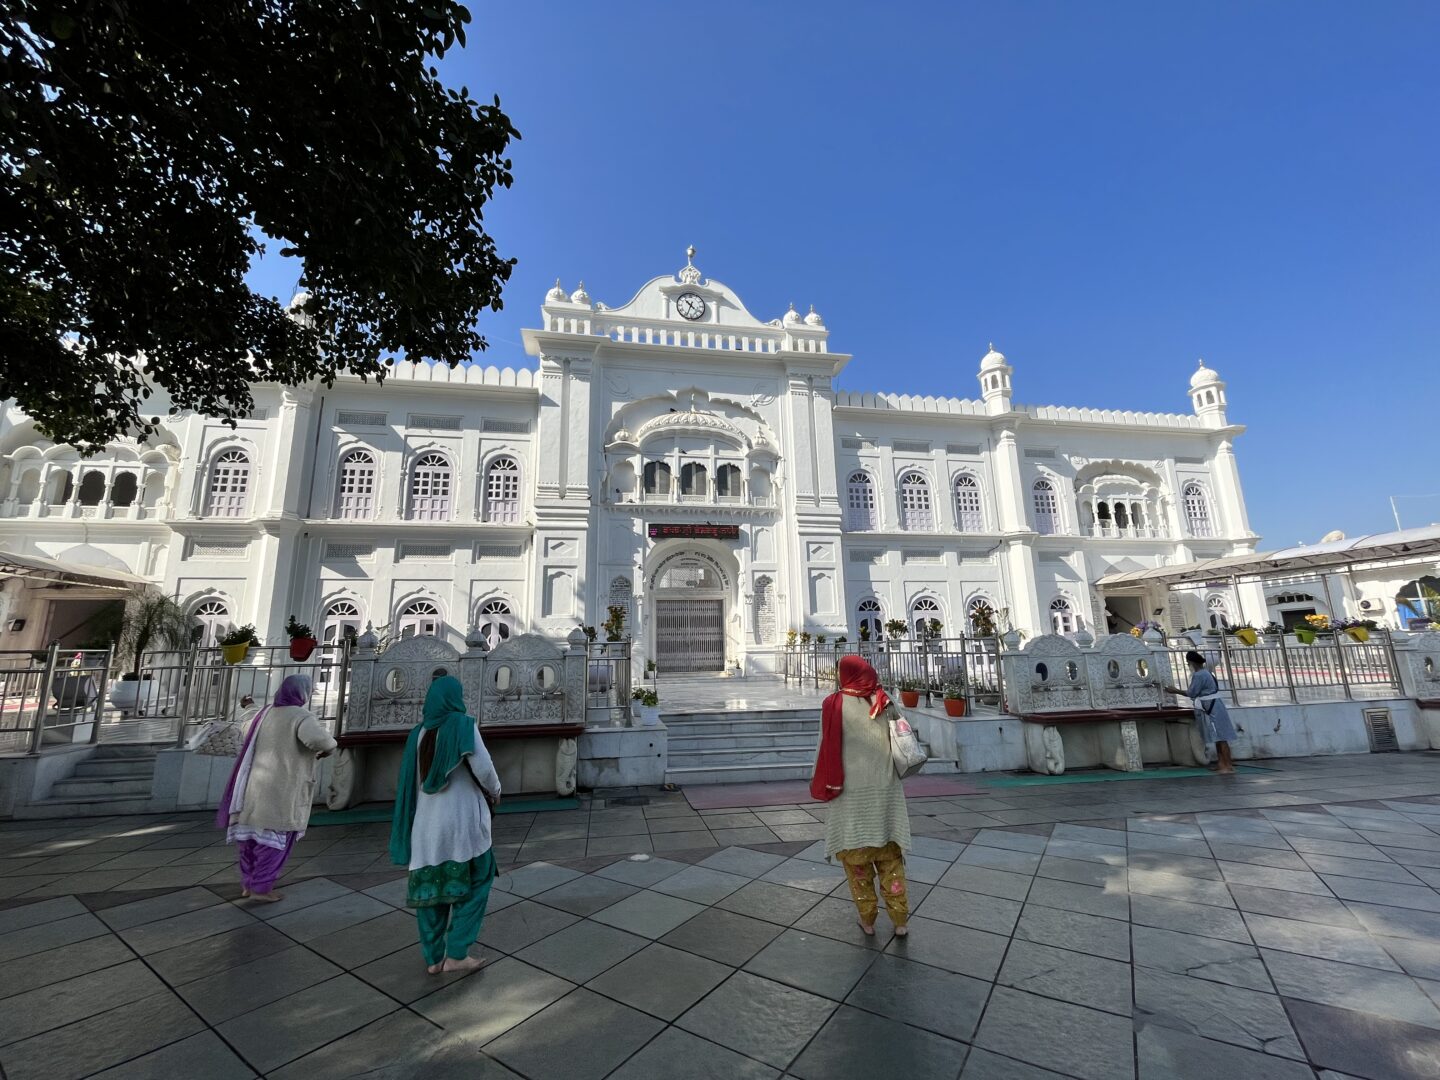 Planning a trip to Anandpur Sahib? This will help!